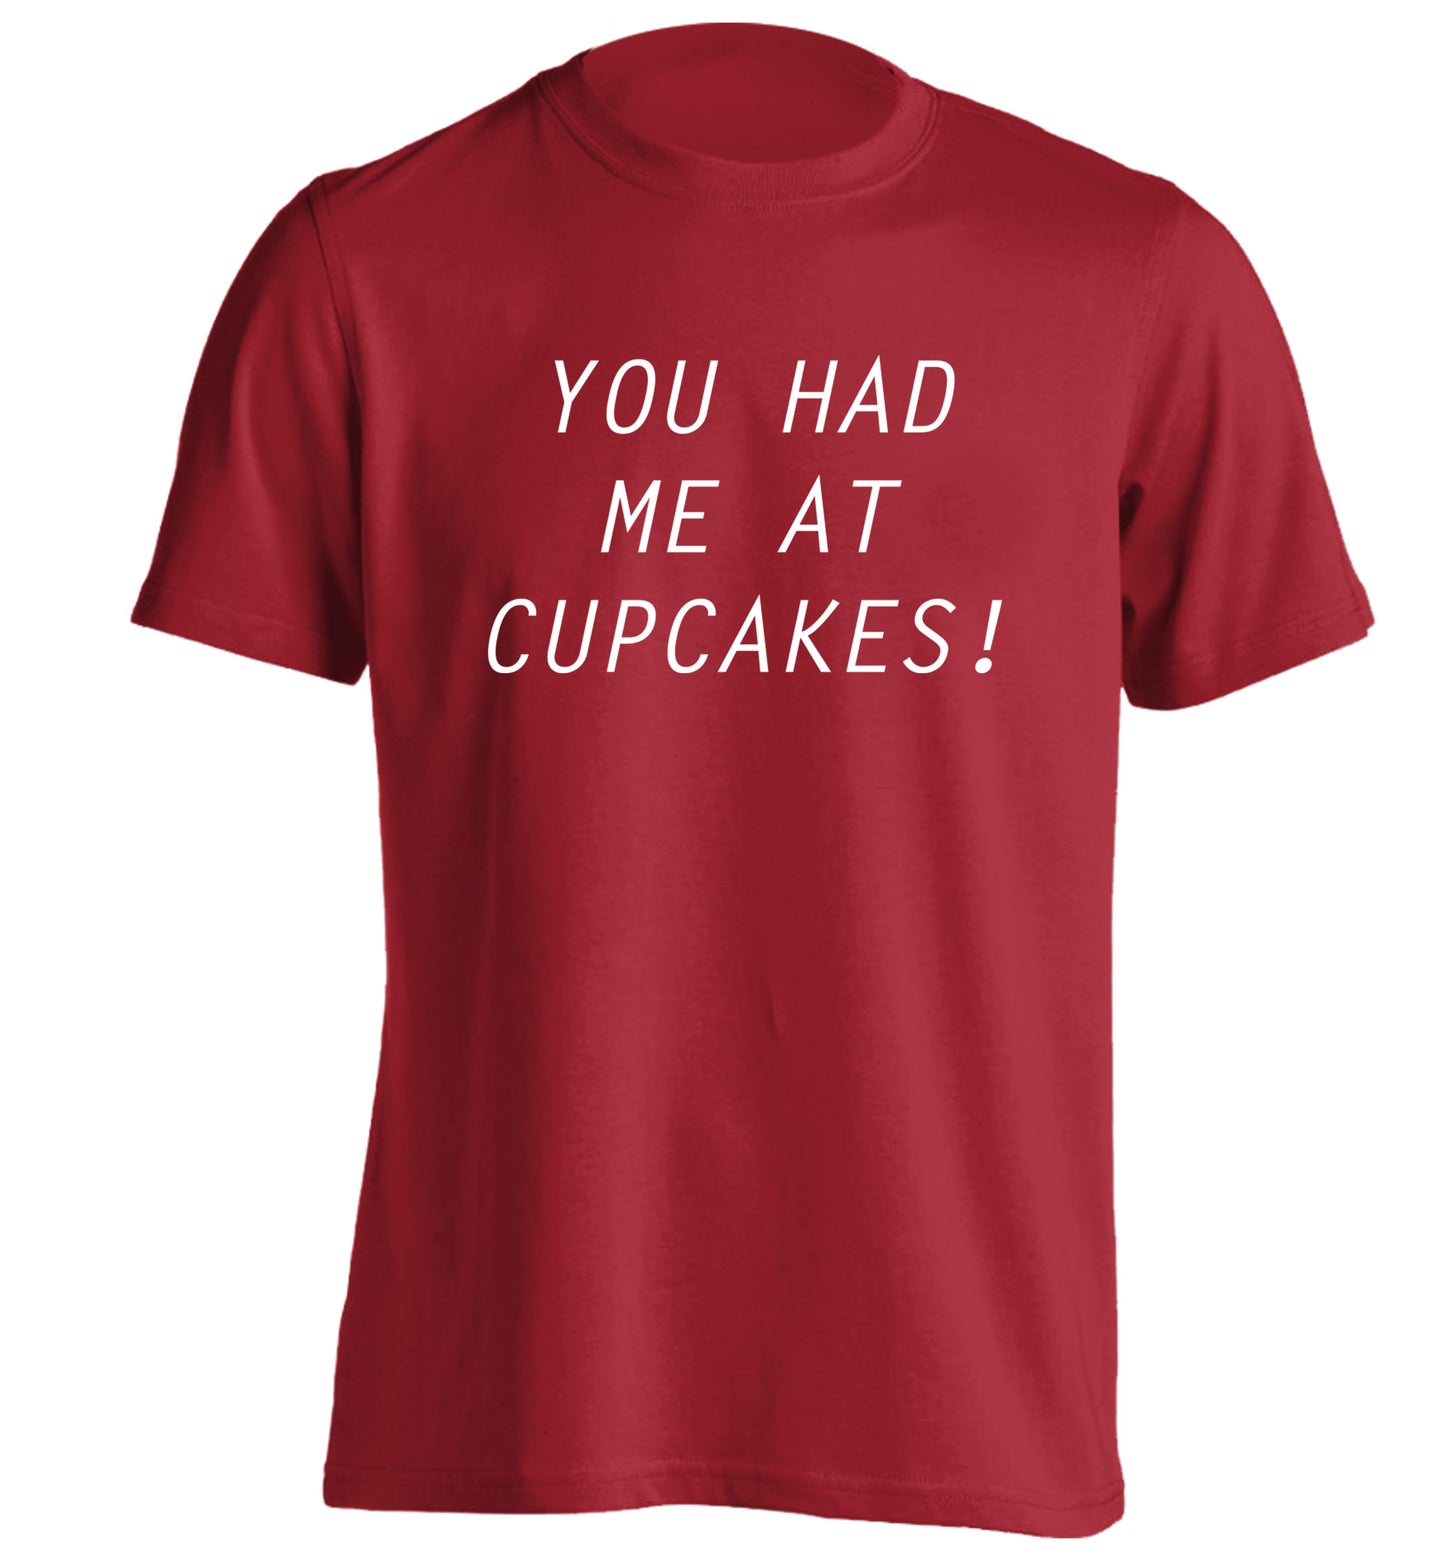 You had me at cupcakes adults unisex red Tshirt 2XL